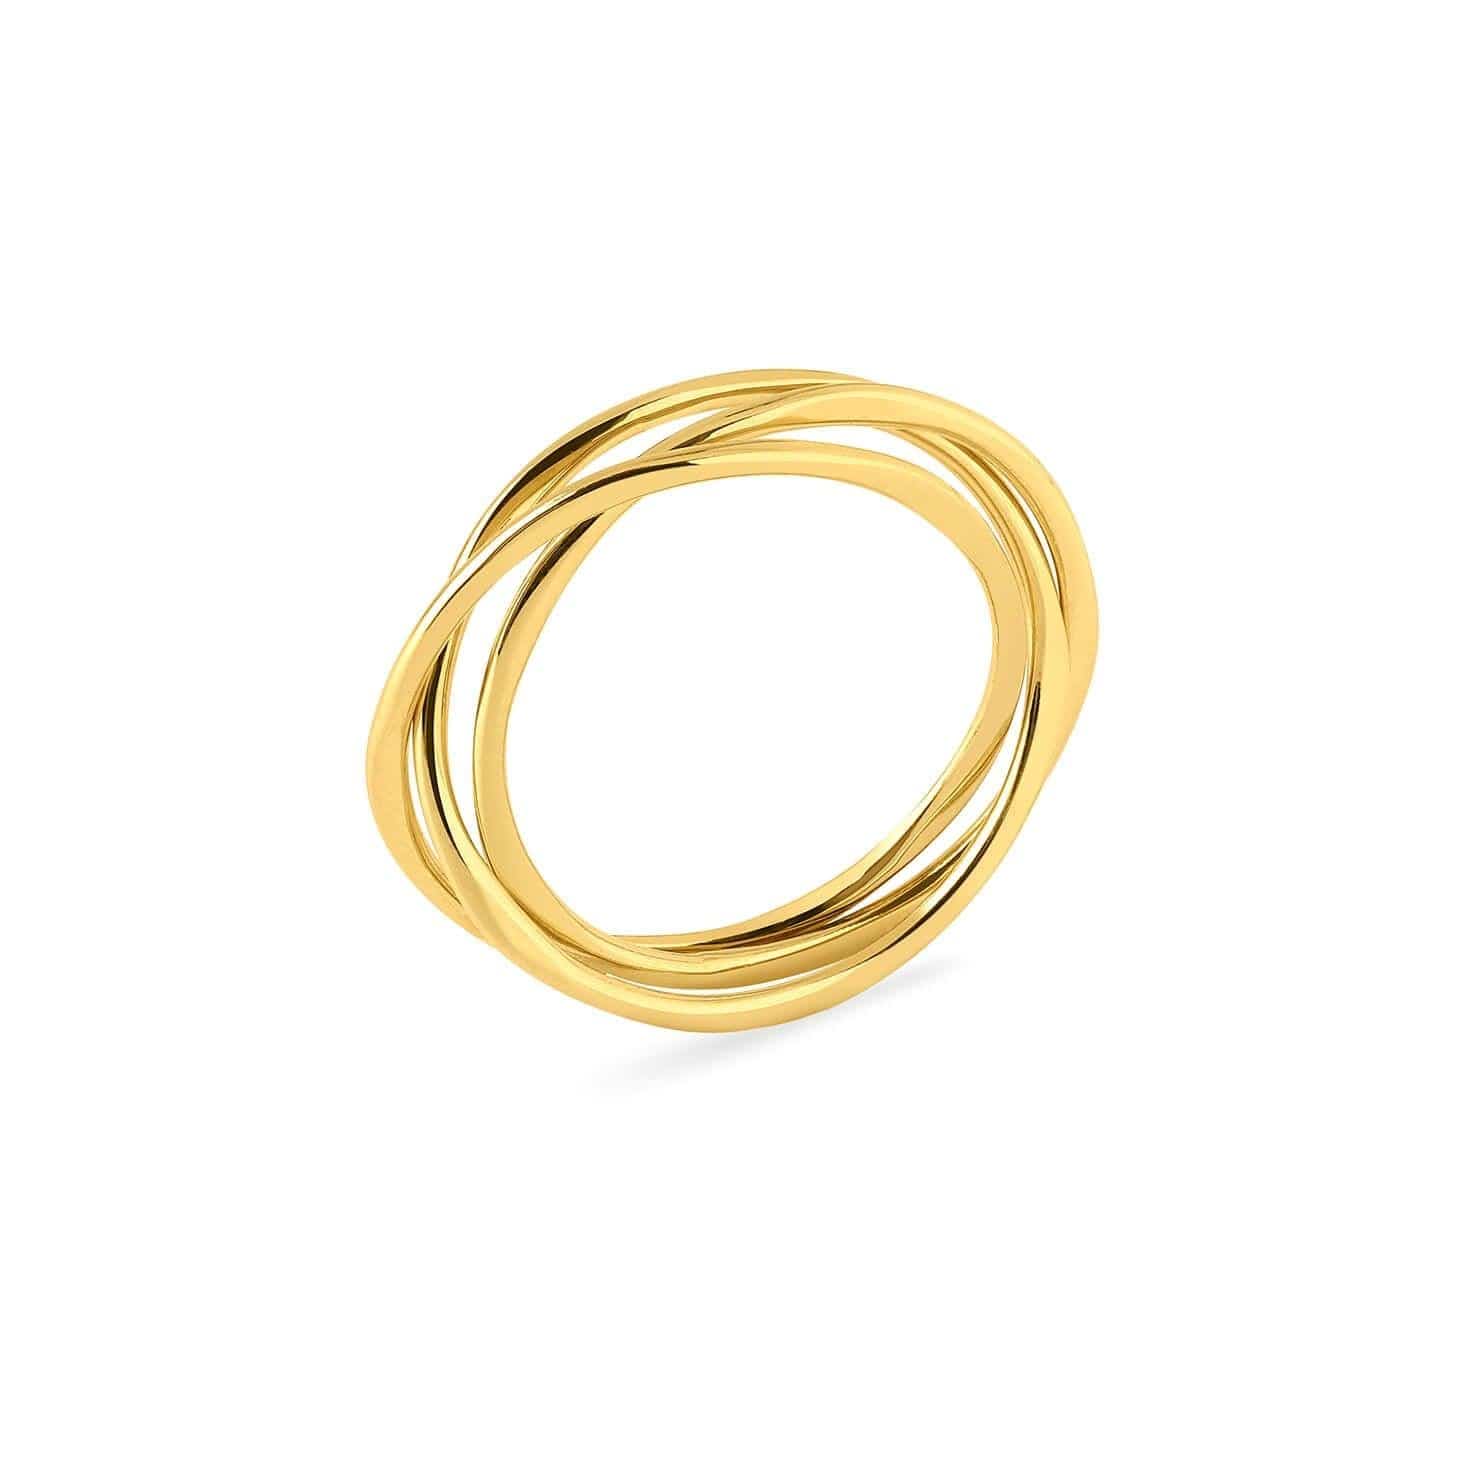 BELLA RINGS -18K GOLD PLATED STAINLESS STEEL Accessories - Kika's  Kollection – KIKA'S KOLLECTION